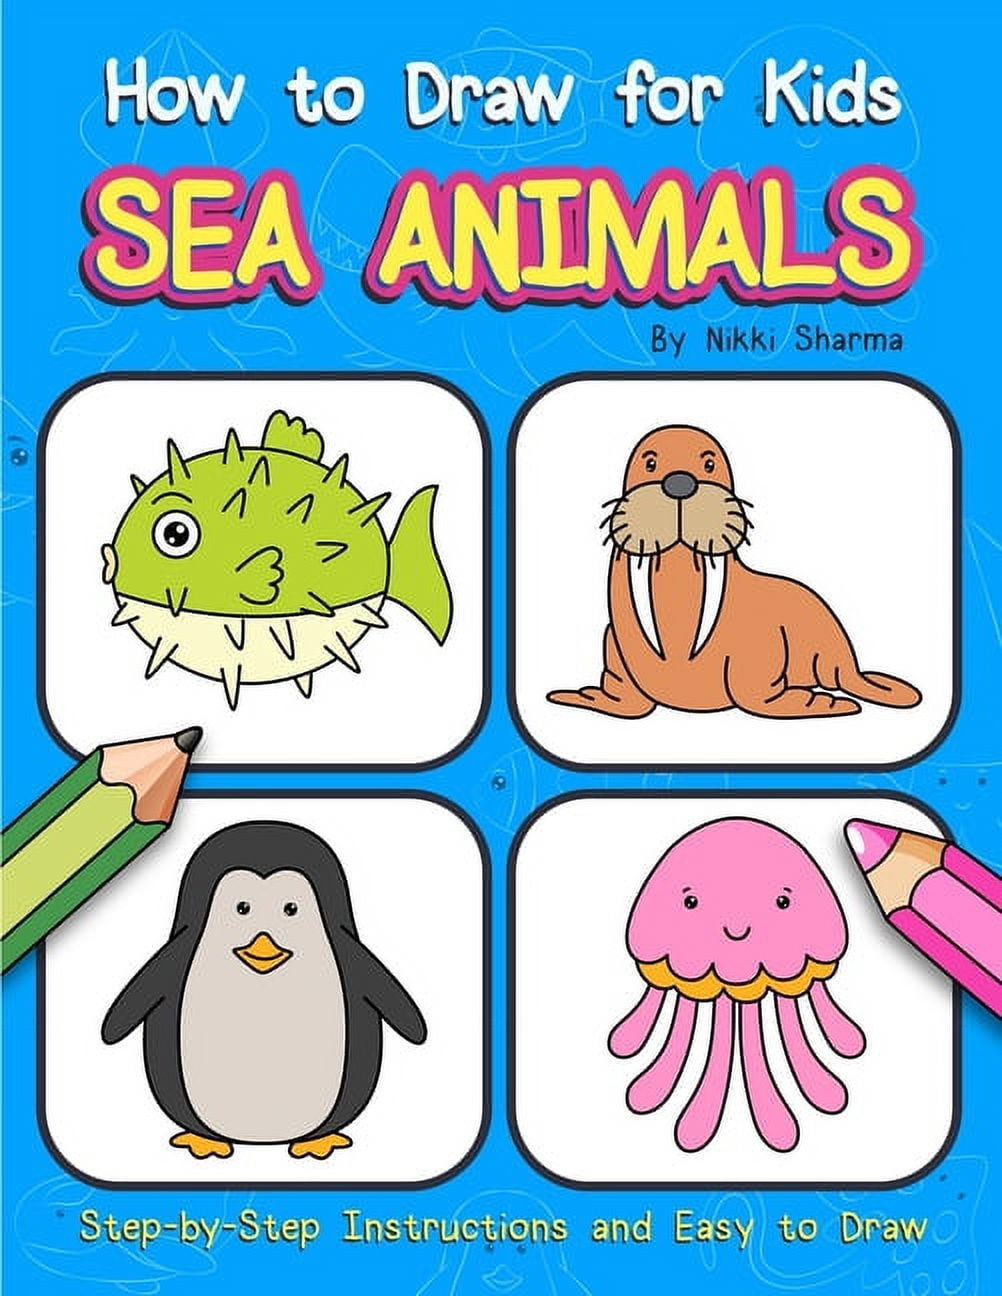 Sea creatures drawing by dbot123 on DeviantArt